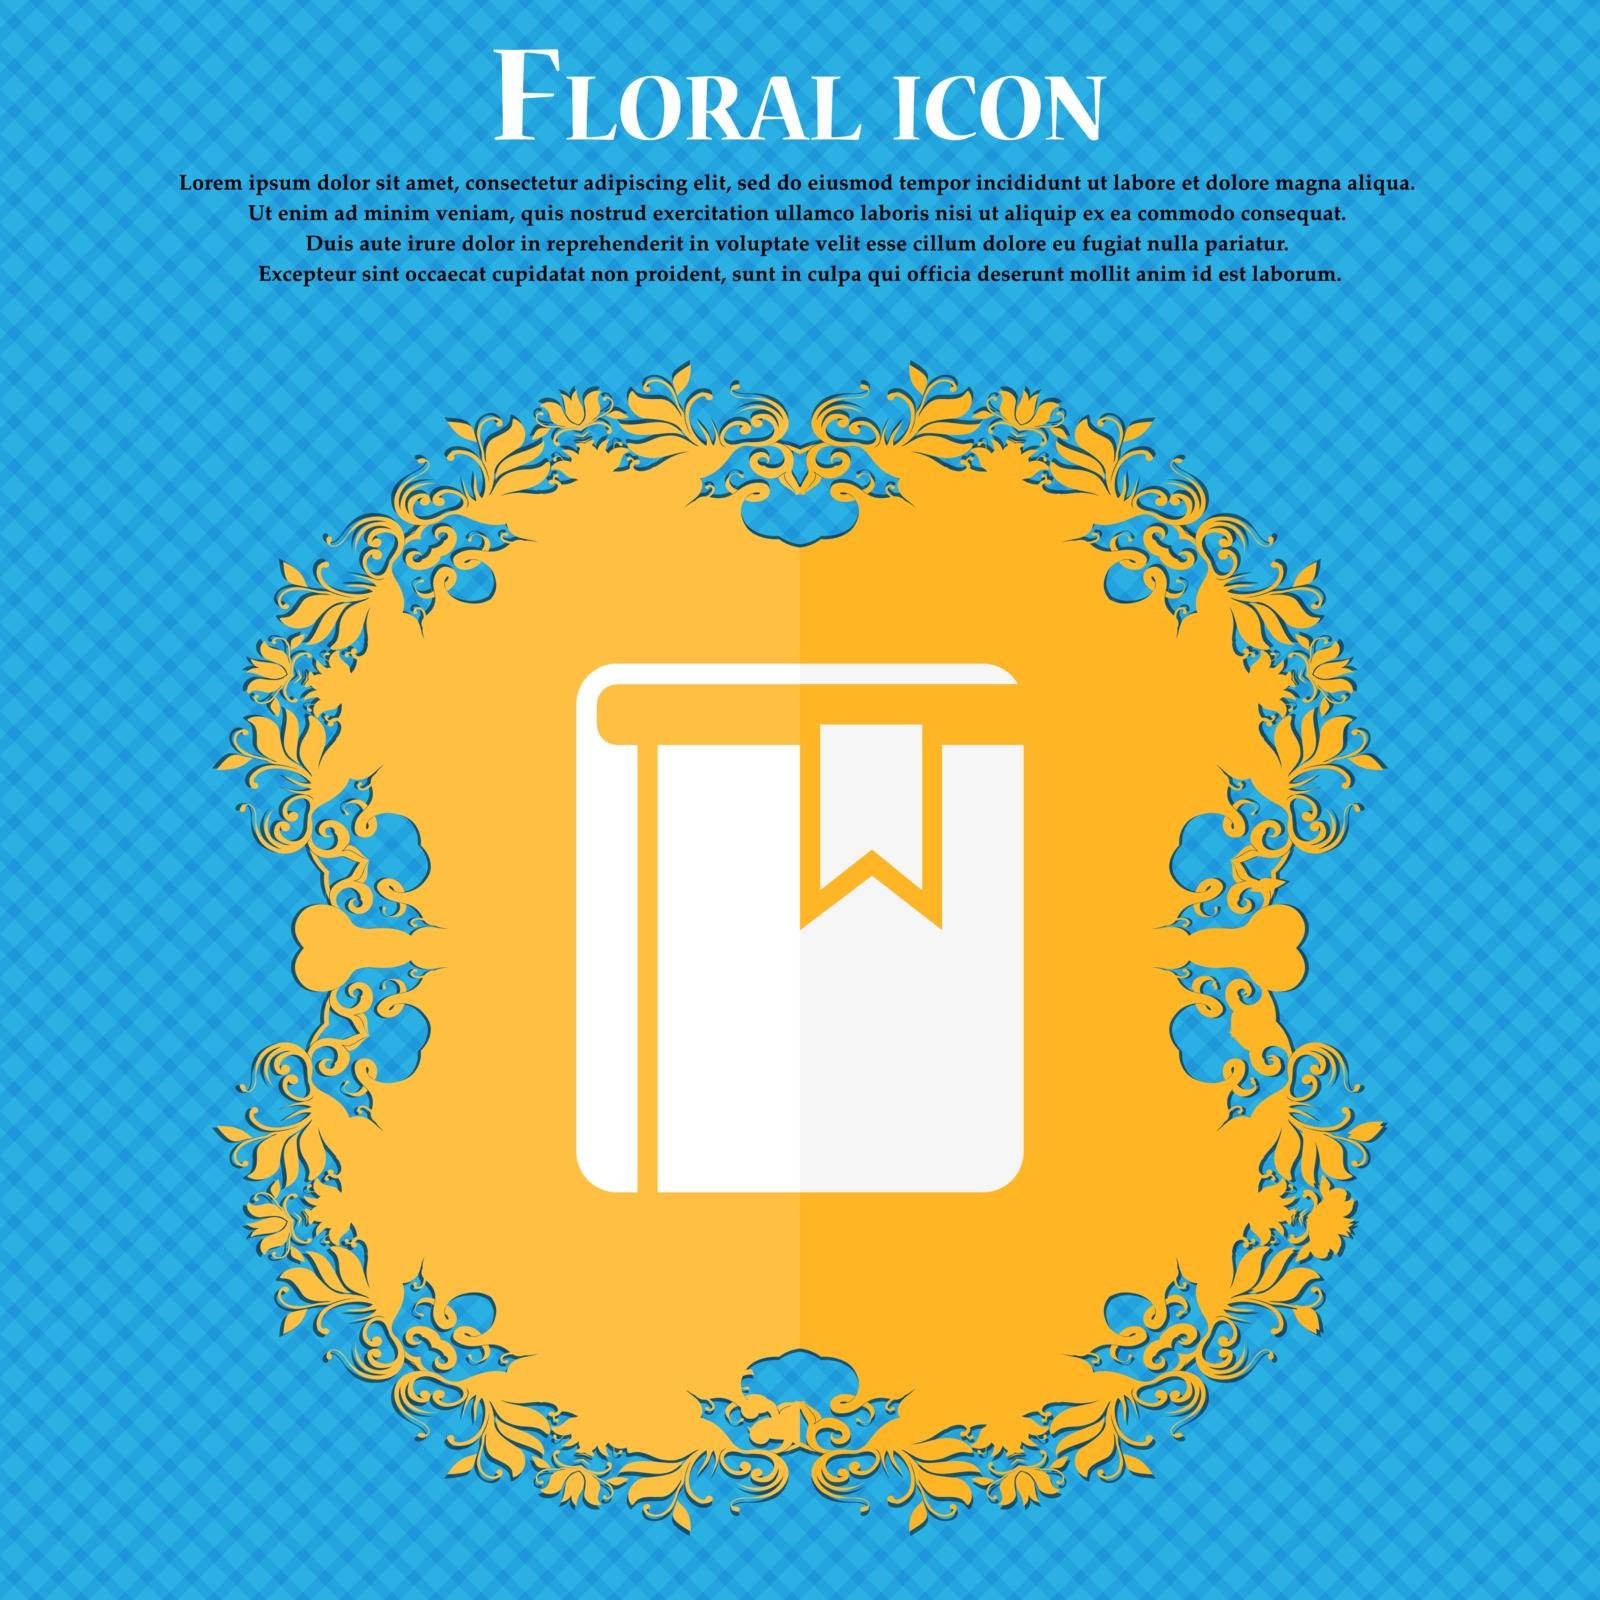 Book bookmark icon. Floral flat design on a blue abstract background with place for your text. Vector illustration